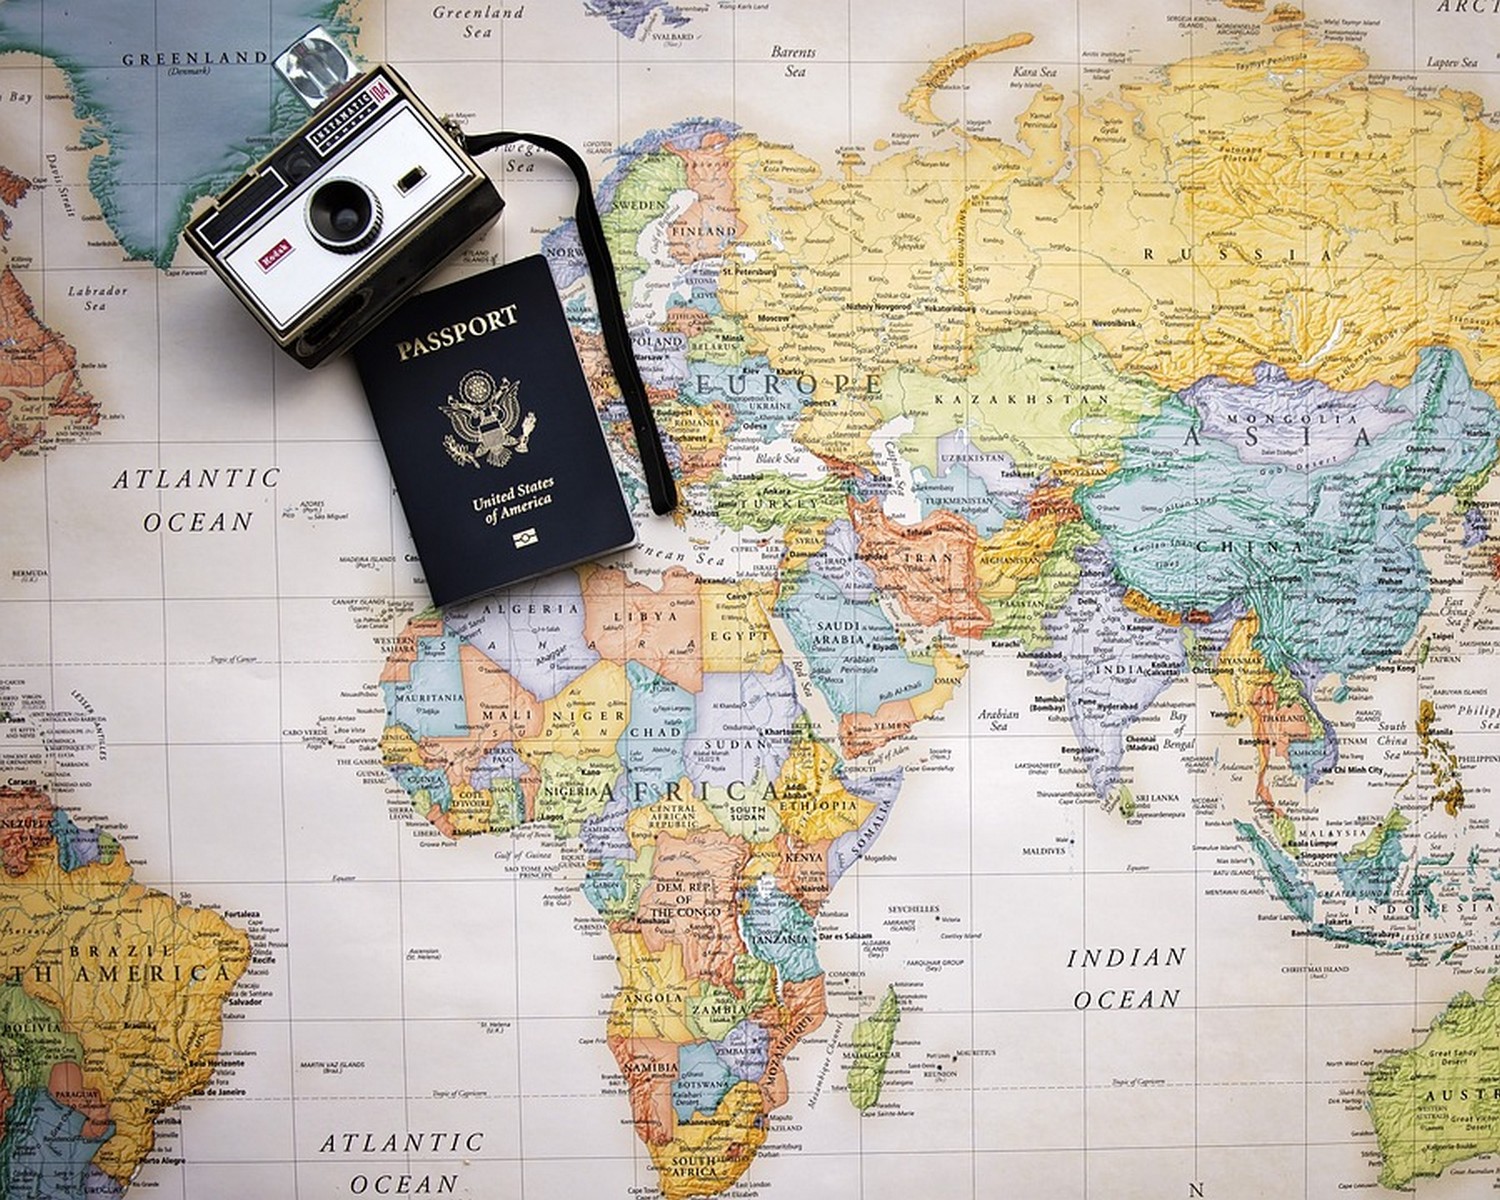 How to Get a Same Day Passport